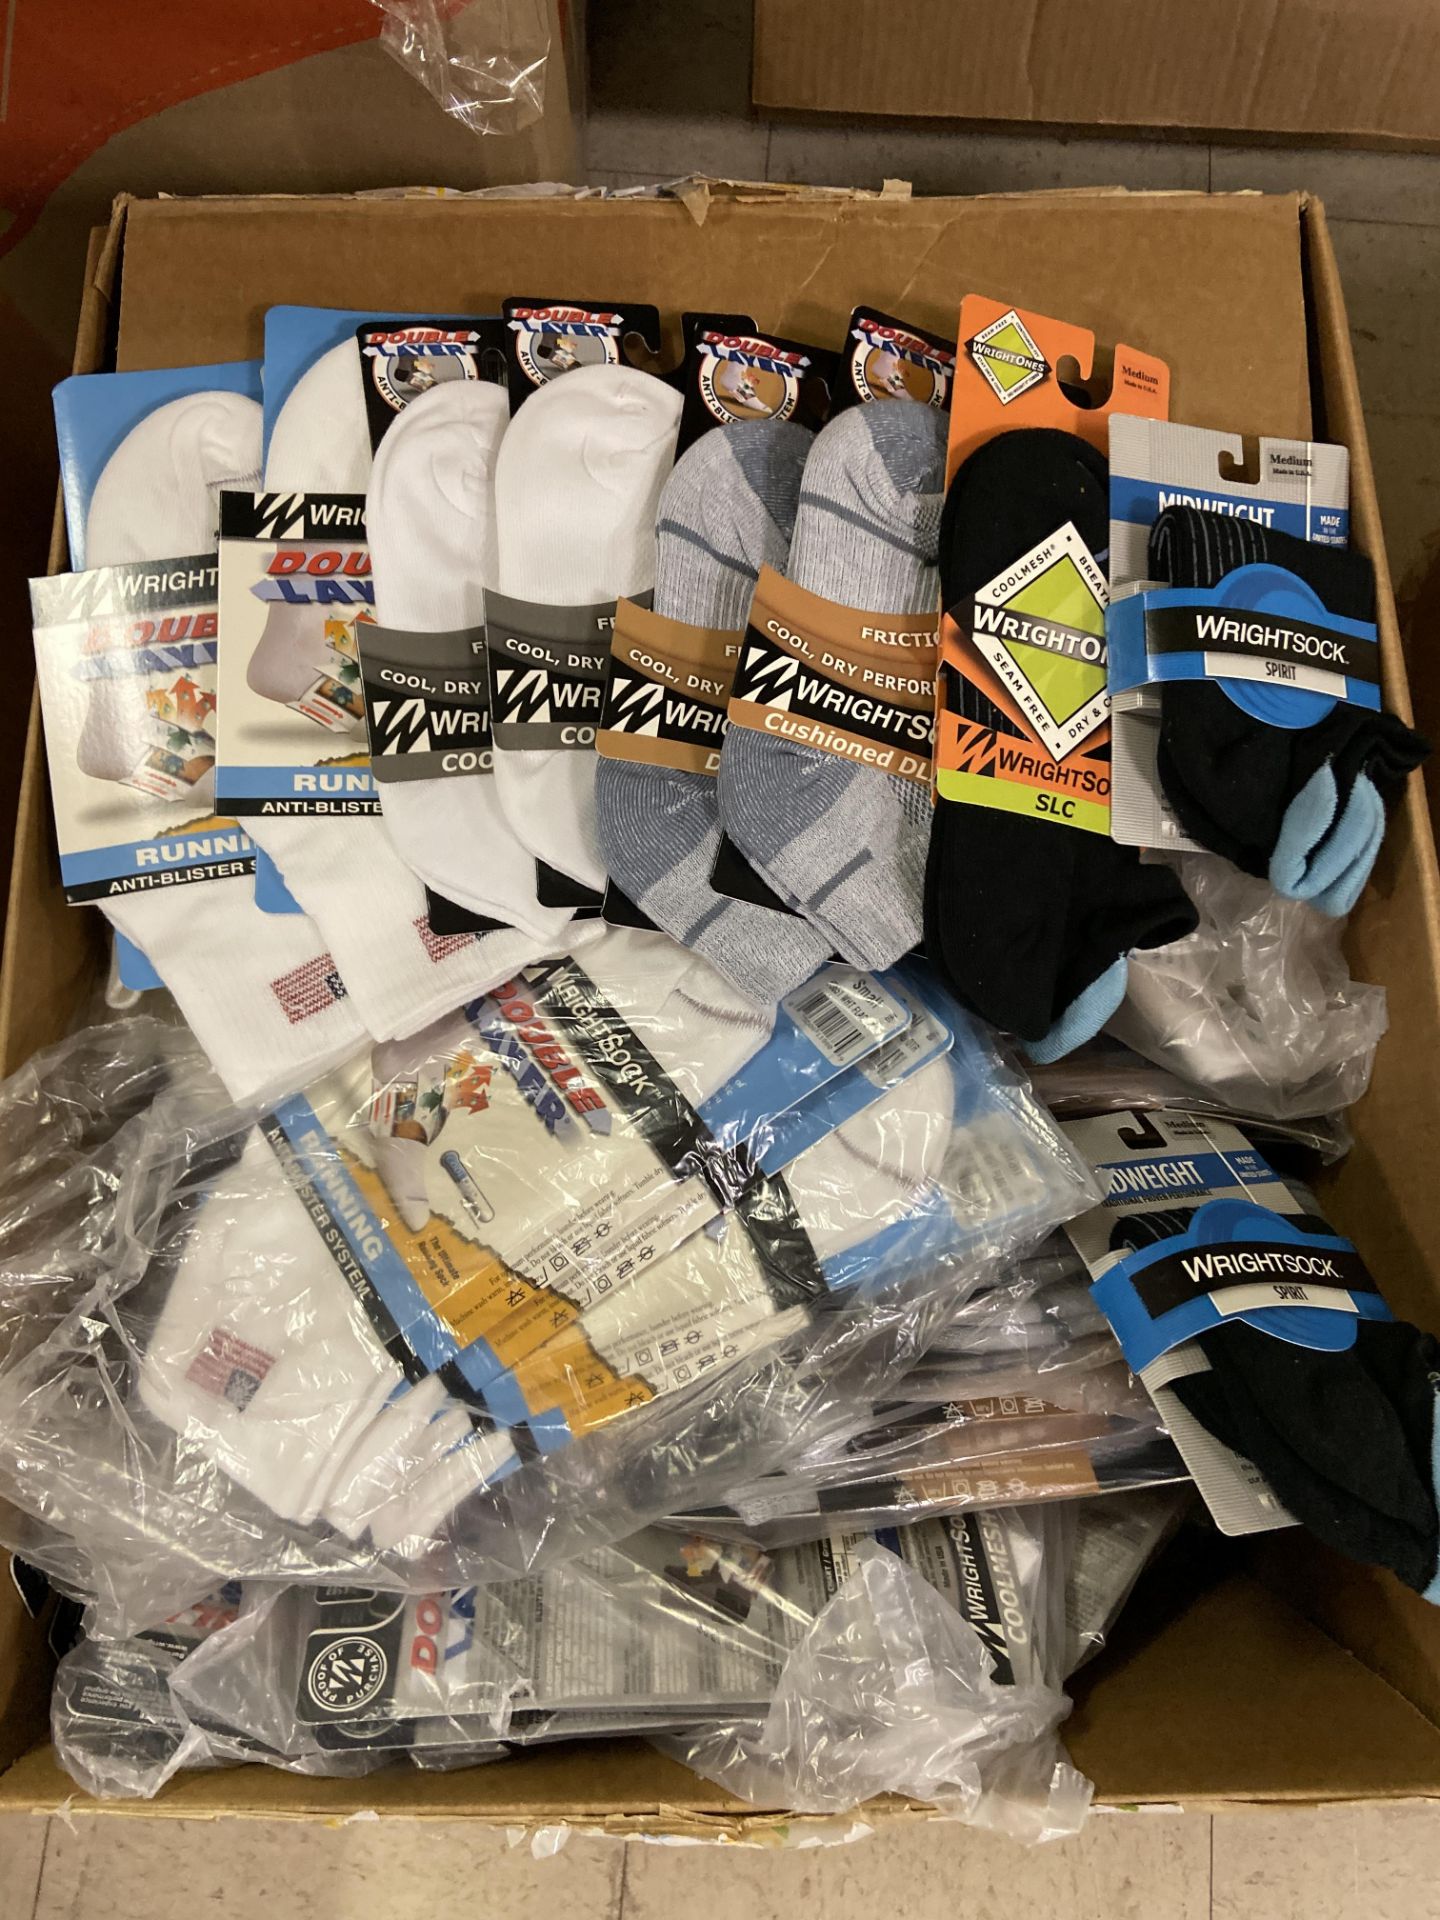 250+ packs of New Socks, Wrightsocks Various Styles, Various Colors Lot includes approximately 250